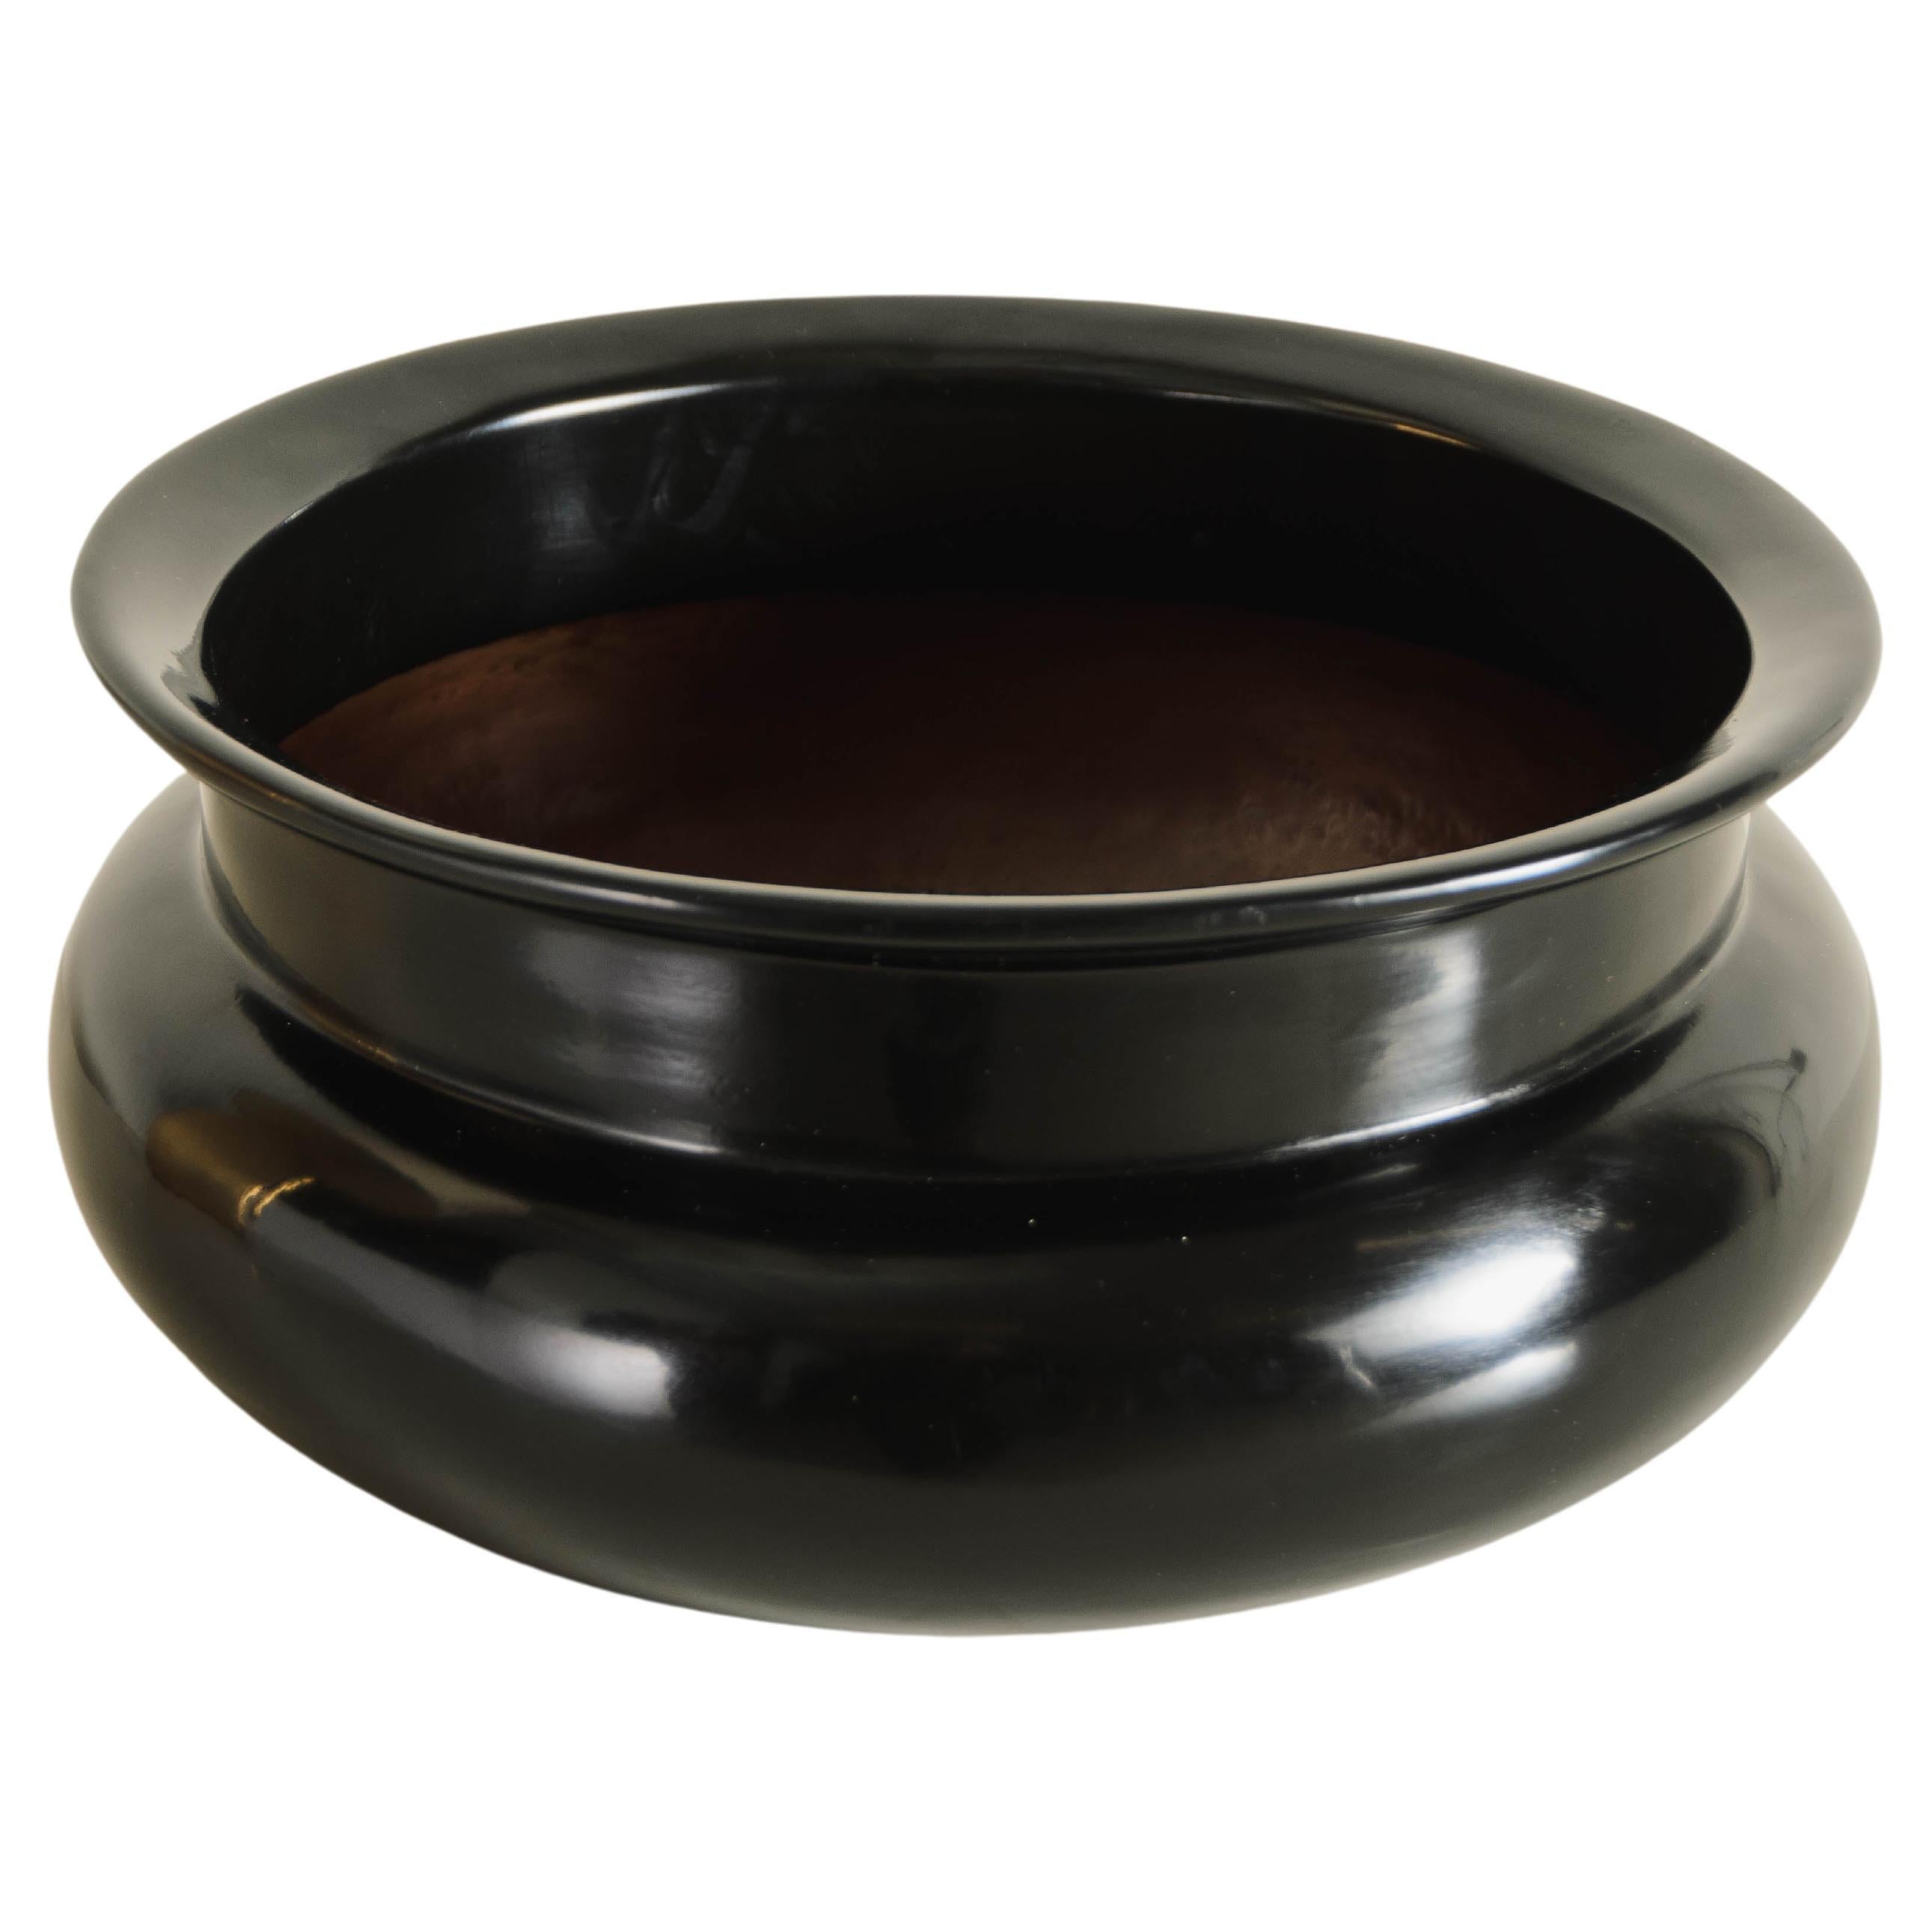 Contemporary Ding Pot in Black Lacquer by Robert Kuo, Limited Edition